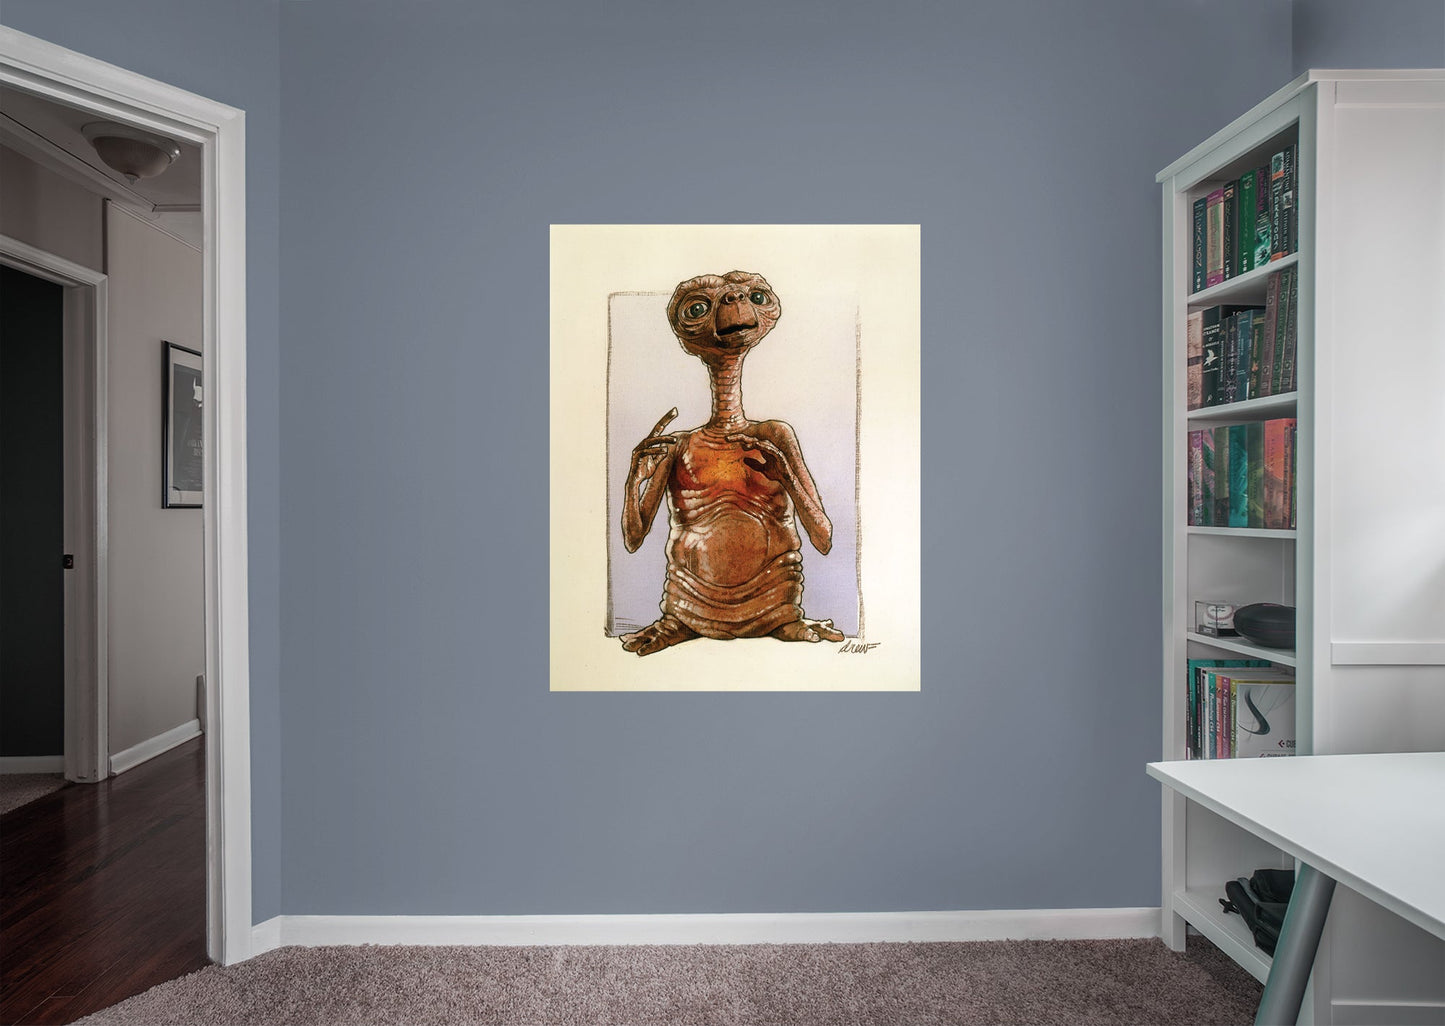 E.T.:  Painting 1 Mural        - Officially Licensed NBC Universal Removable Wall   Adhesive Decal